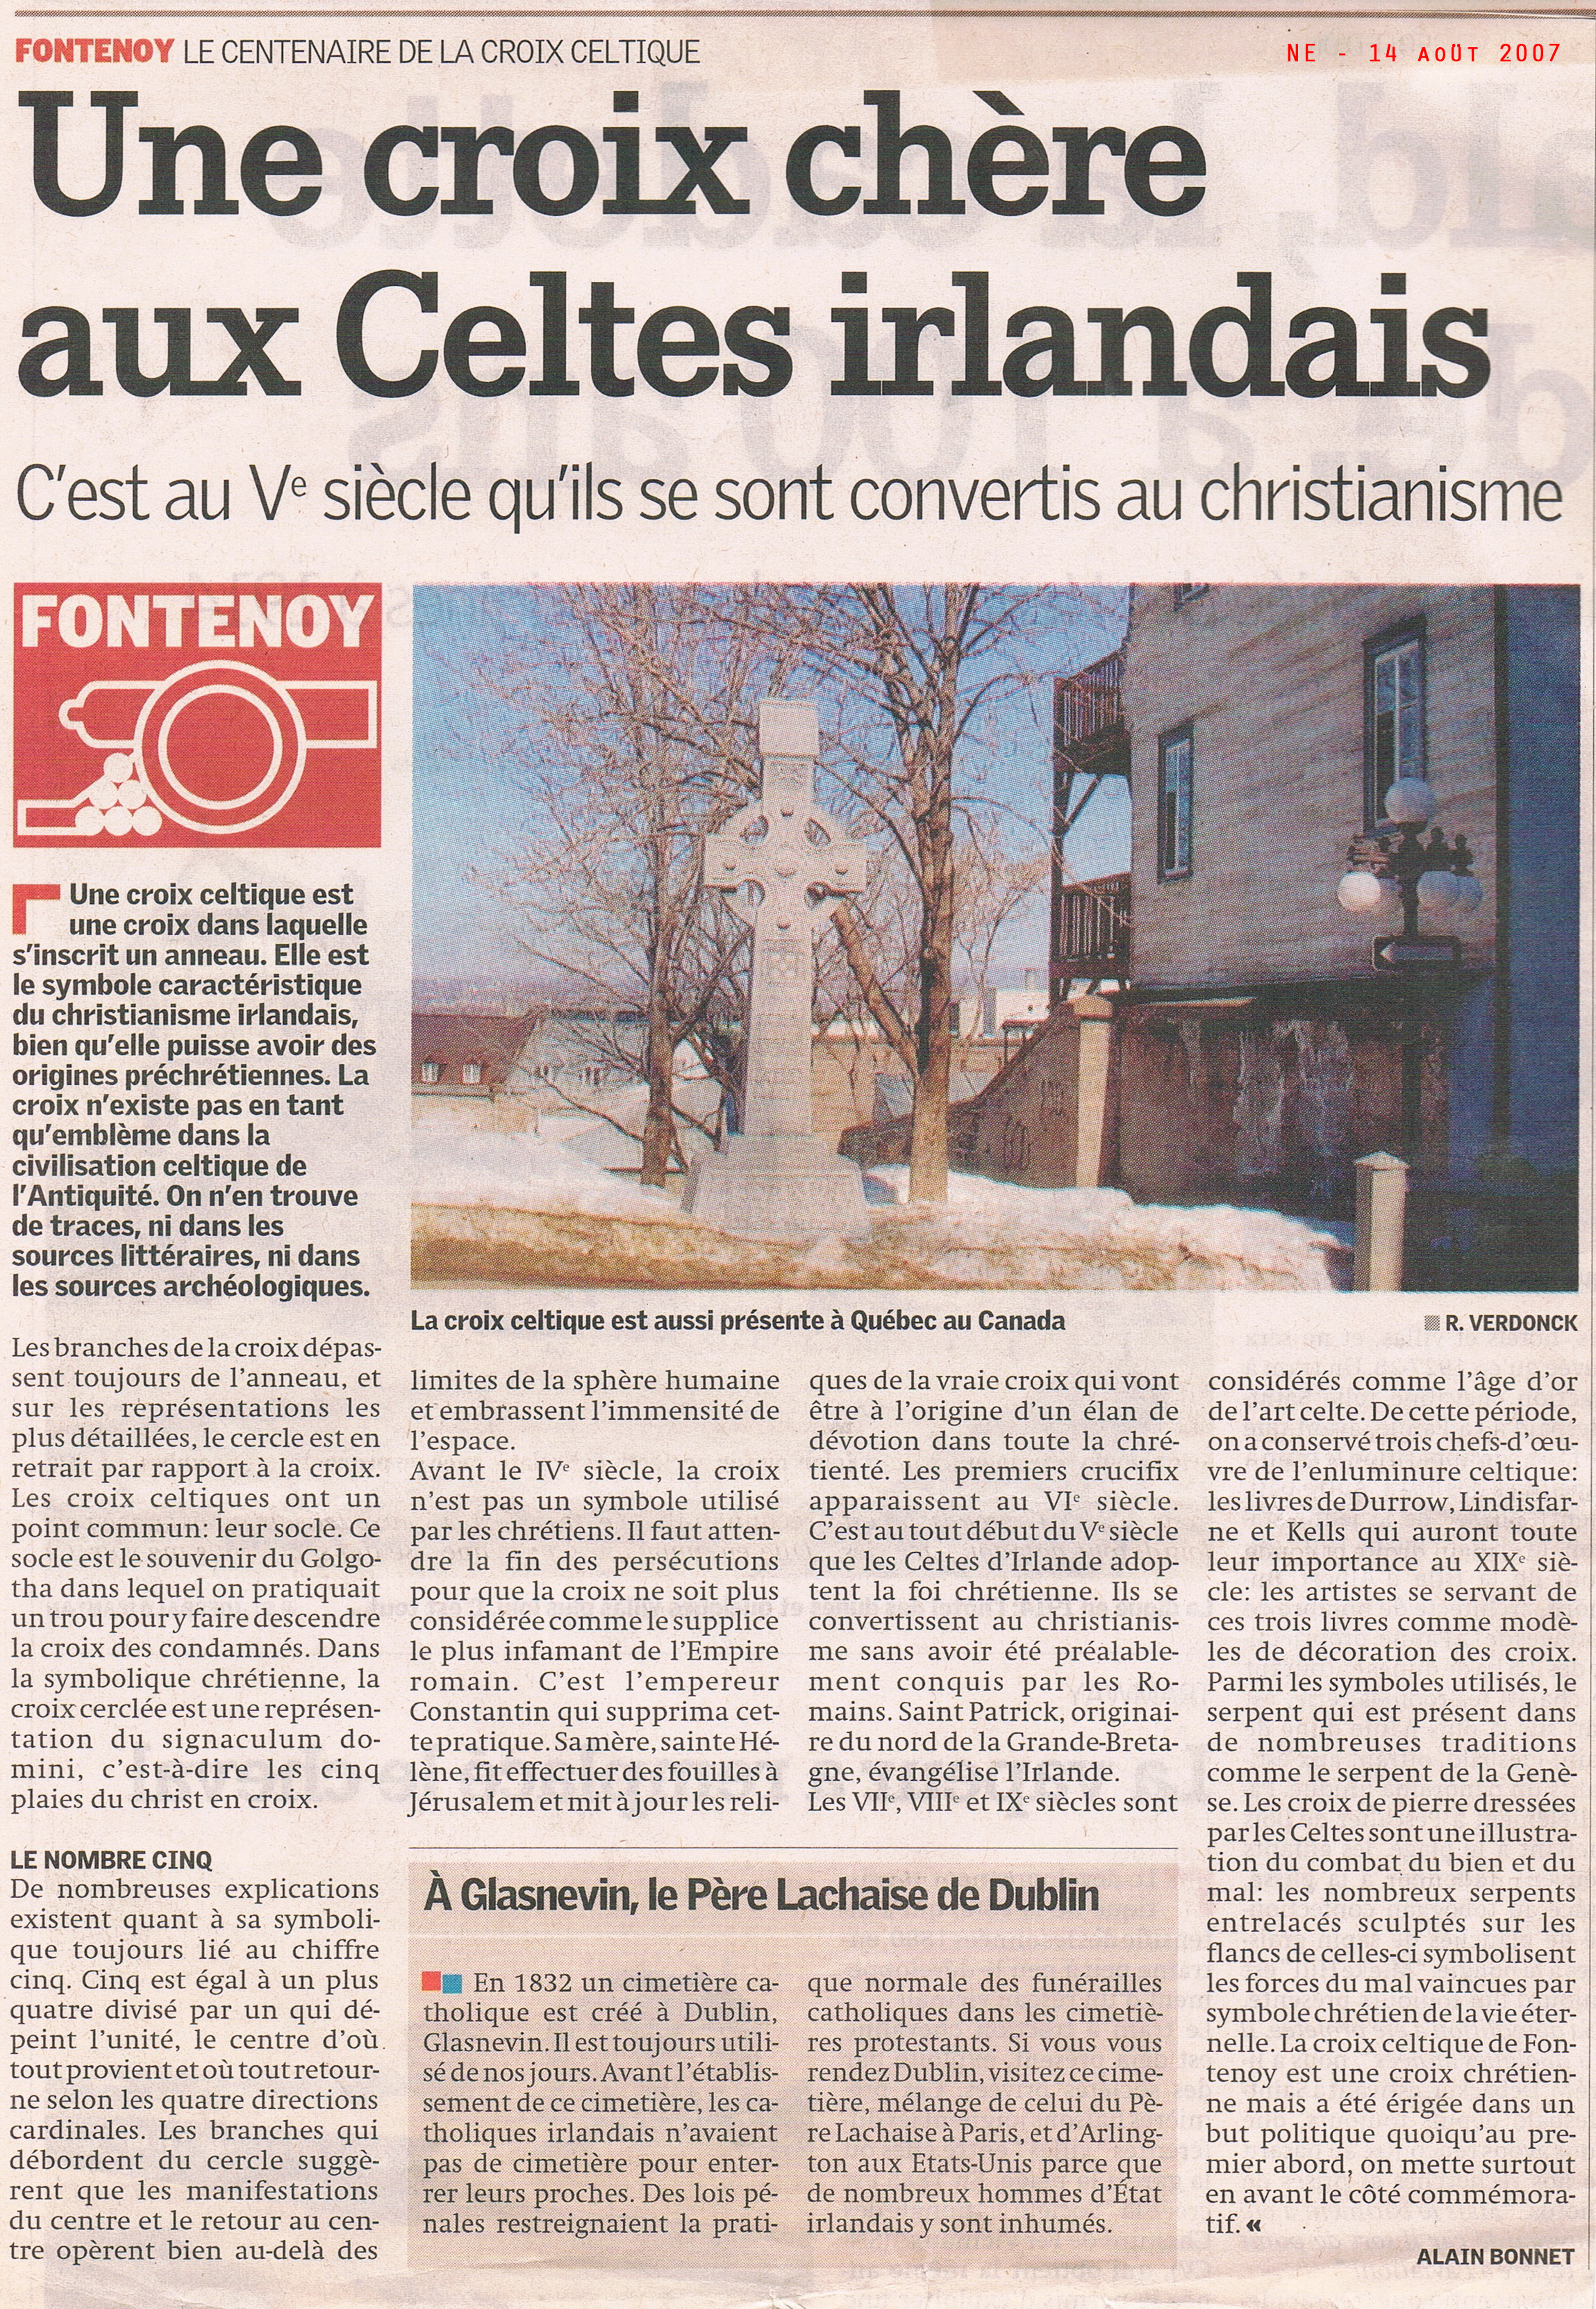 2 article nord eclair mardi 14 aot 2007